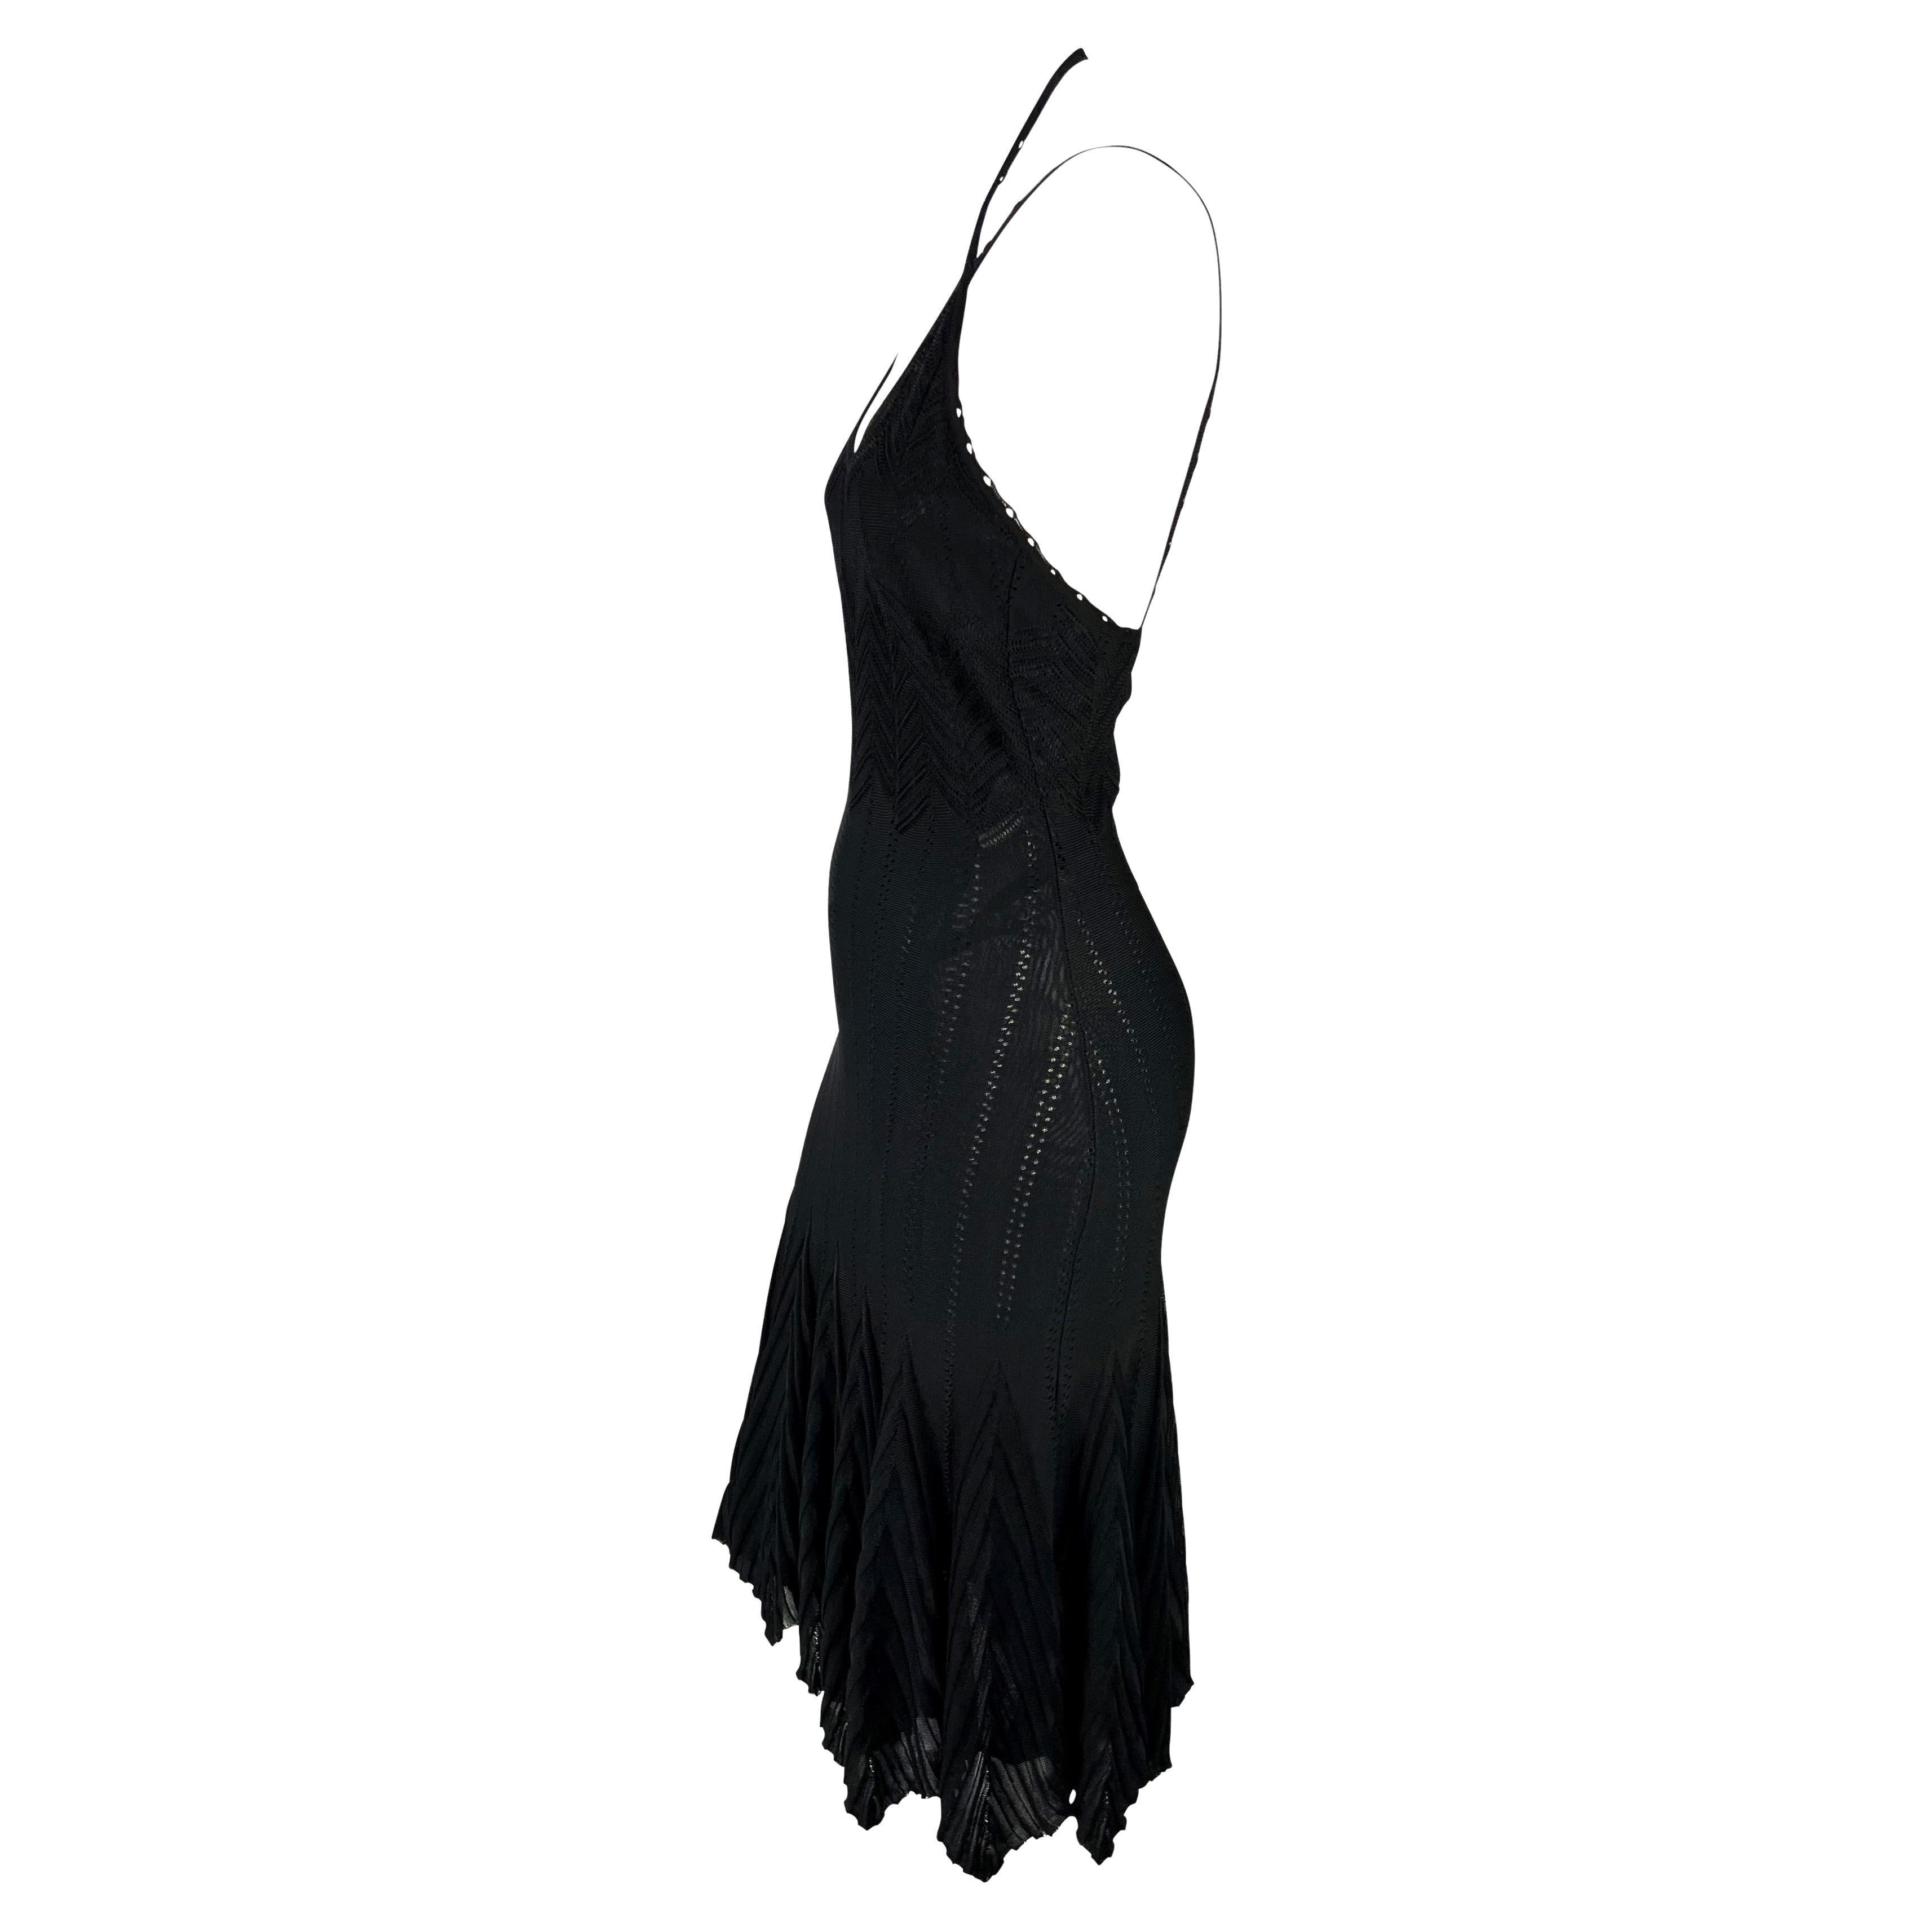 S/S 2006 Christian Dior by John Galliano Sheer Stretch Knit Black Flare Dress In Excellent Condition For Sale In West Hollywood, CA